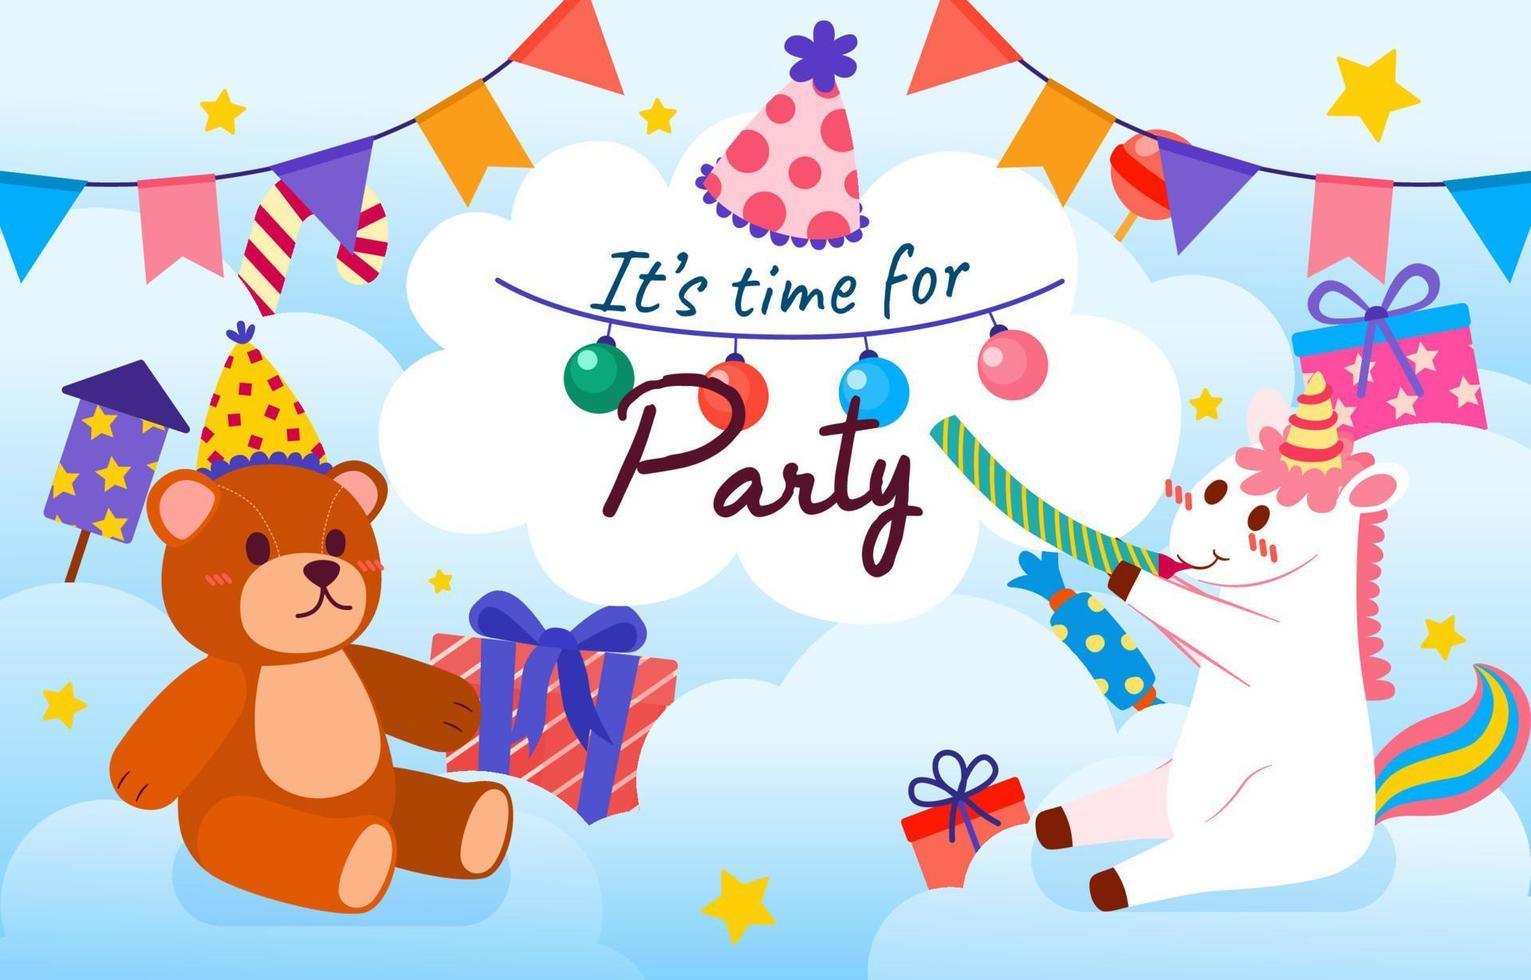 Greeting card design with lovely party vector